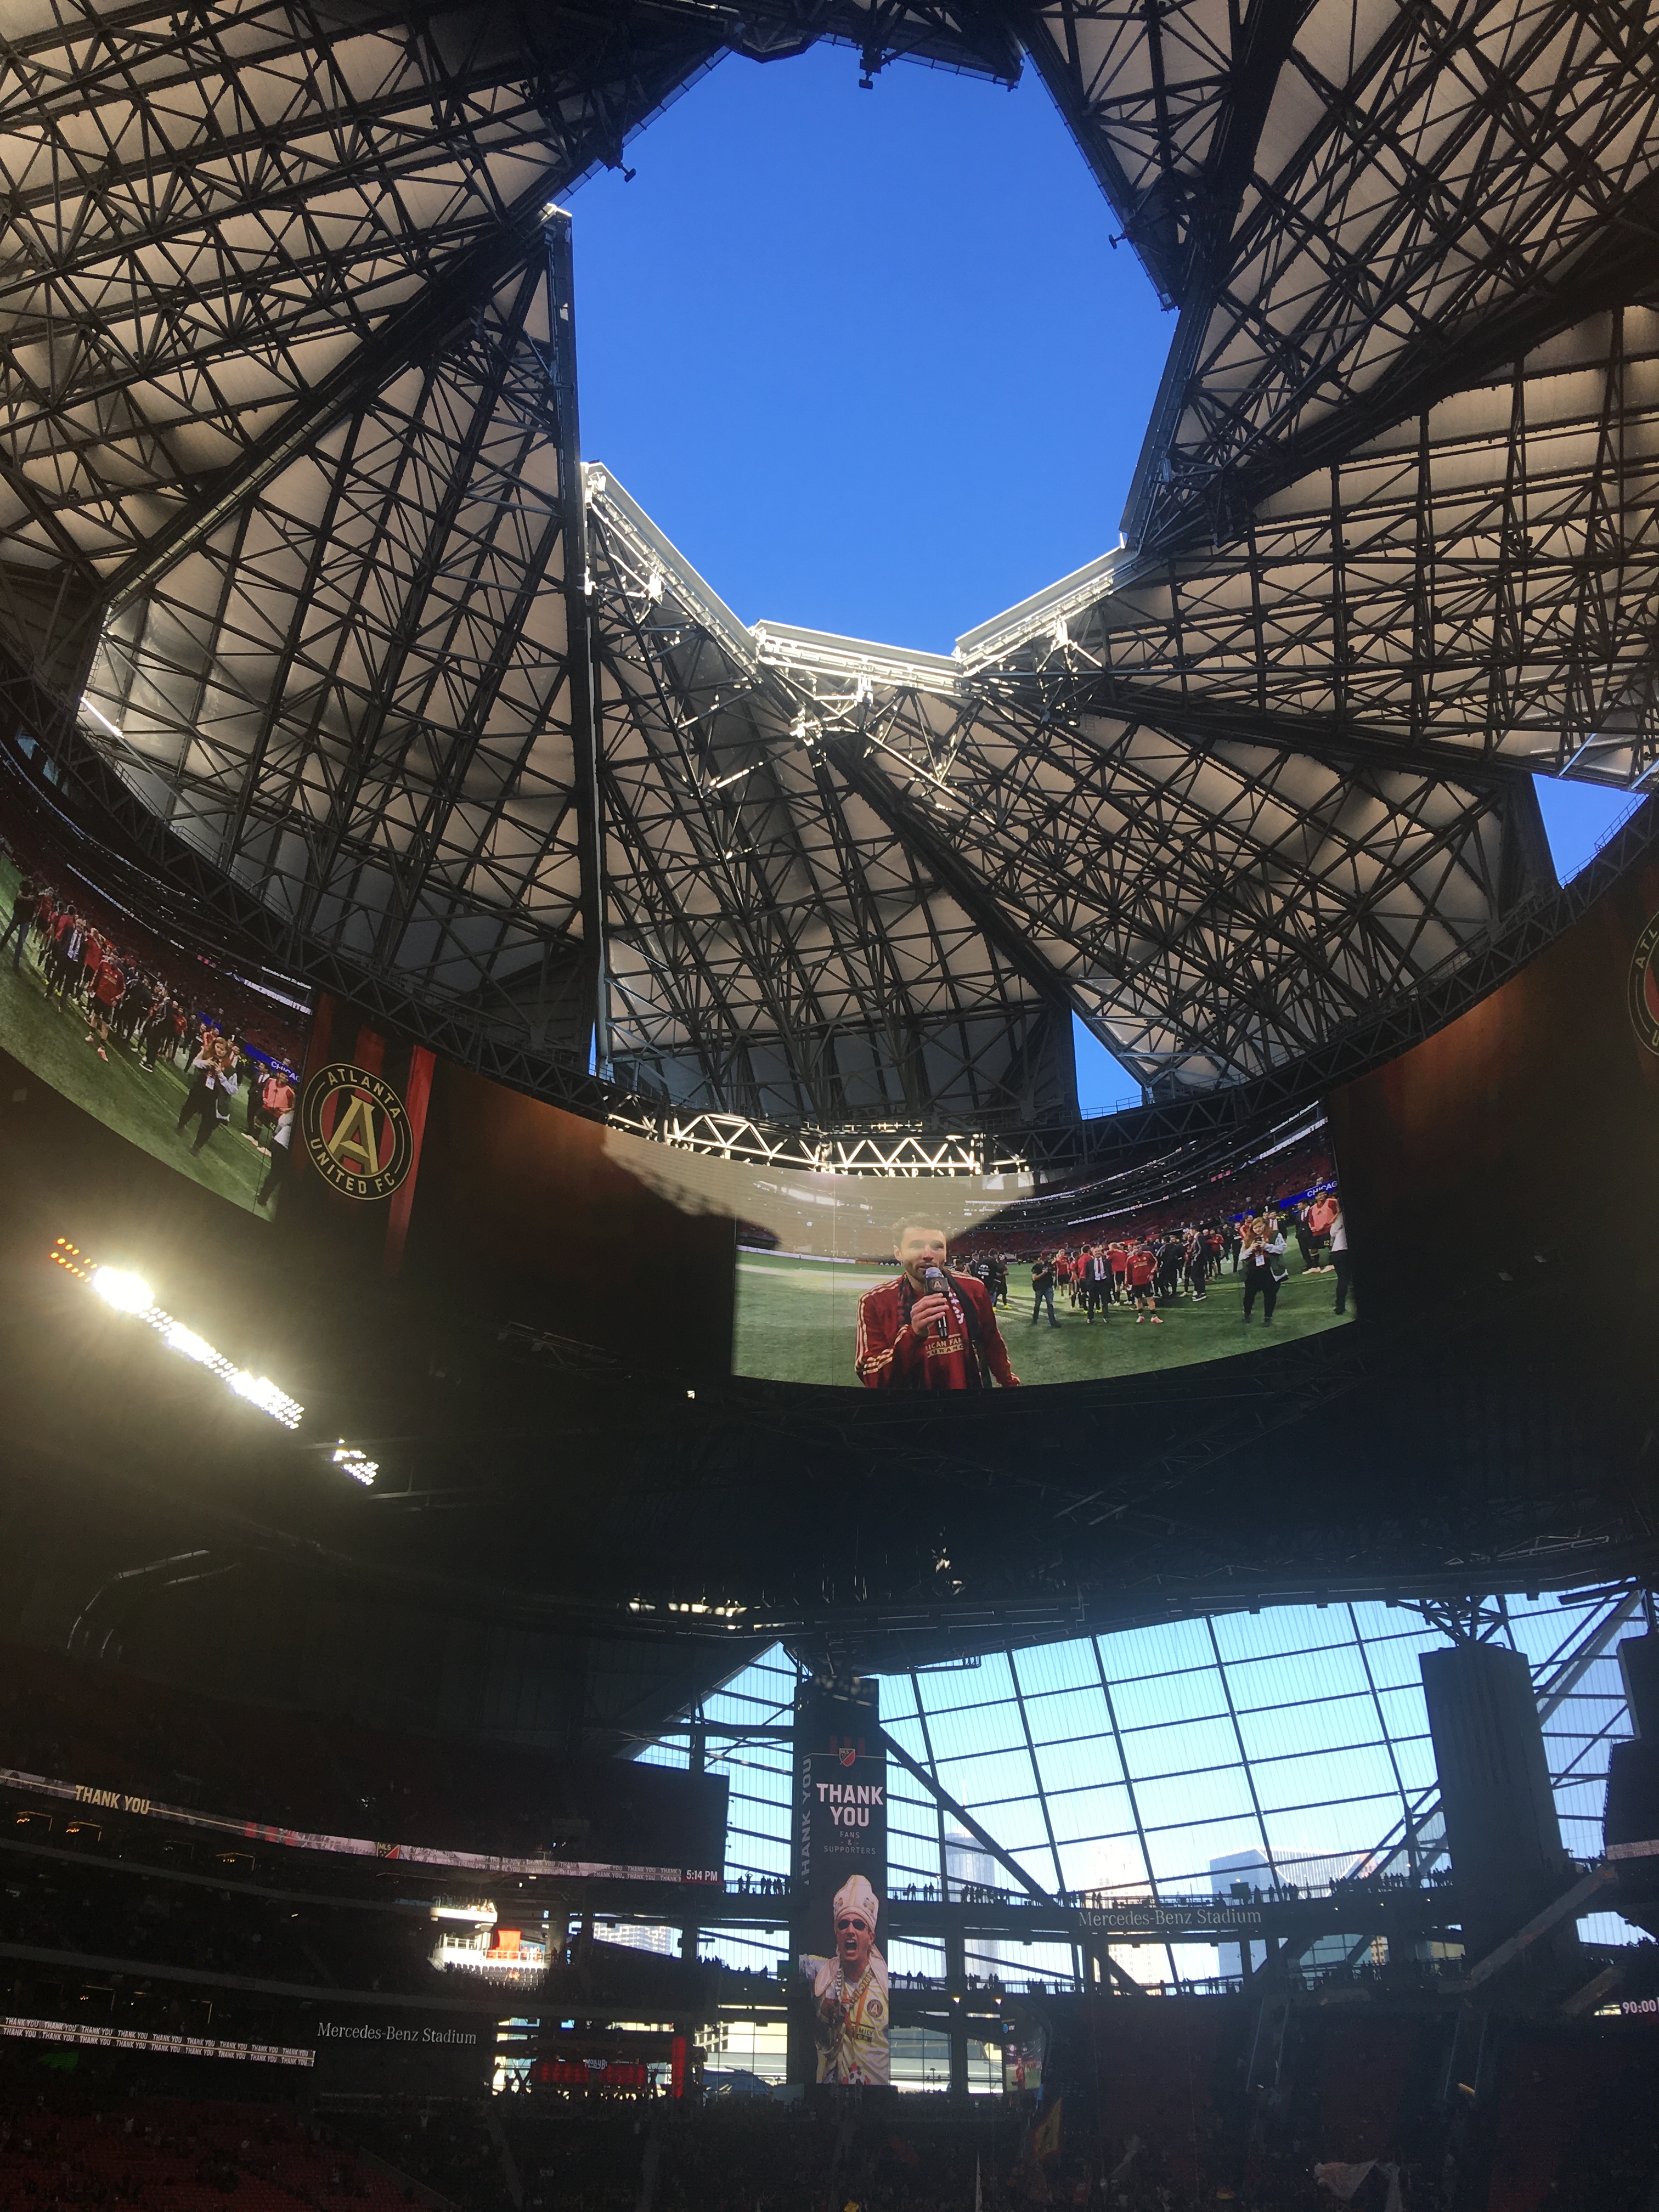 Mercedes-Benz Stadium in Atlanta, opened in August 2017 and features eight operable panels at the center of the roof. Photo Source: Eric.Jason.Cross via Wikimedia Commons